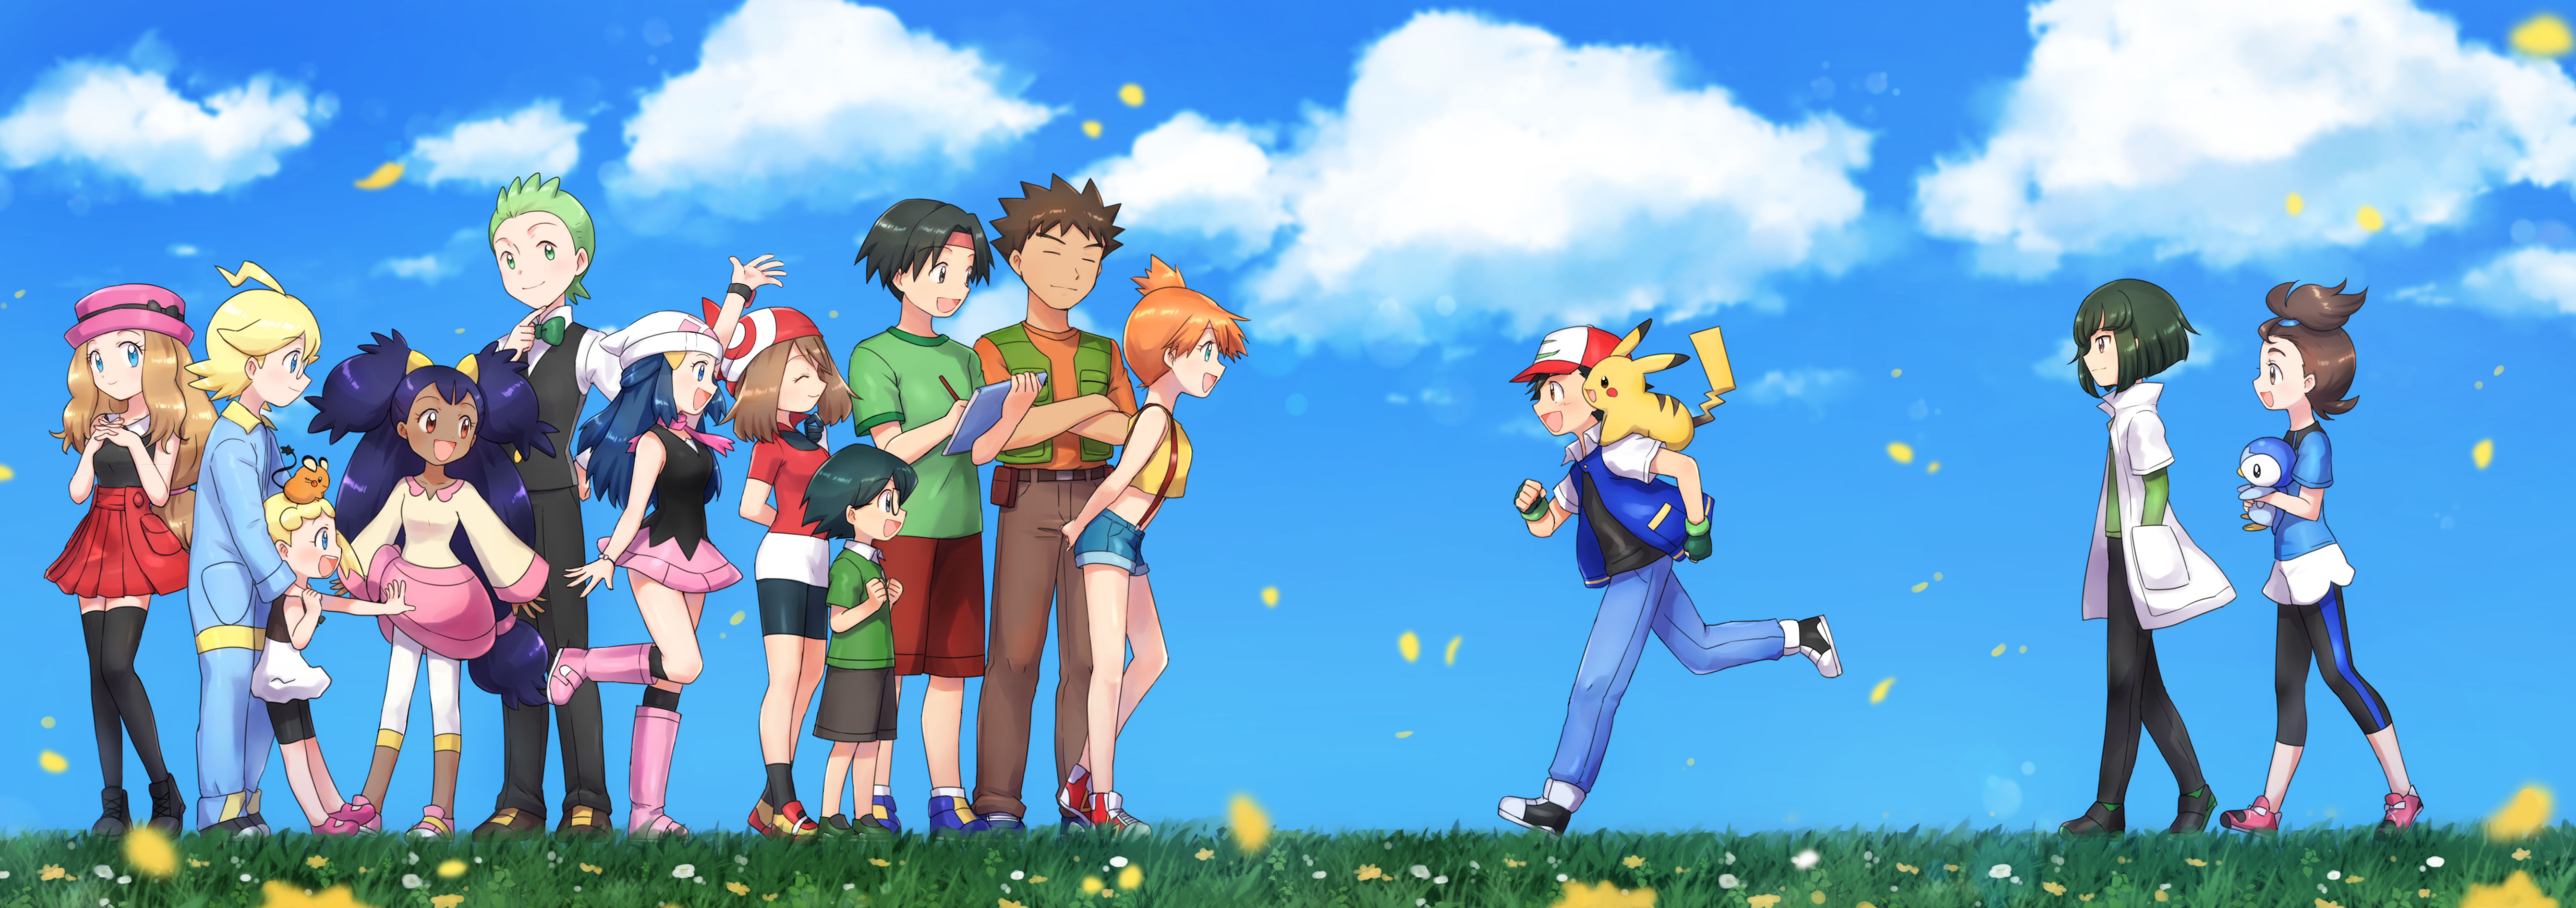 Misty, Dawn, May, Ash Ketchum, Clemont, Iris, Serena and Tracey (Pokémon) HD Wallpaper